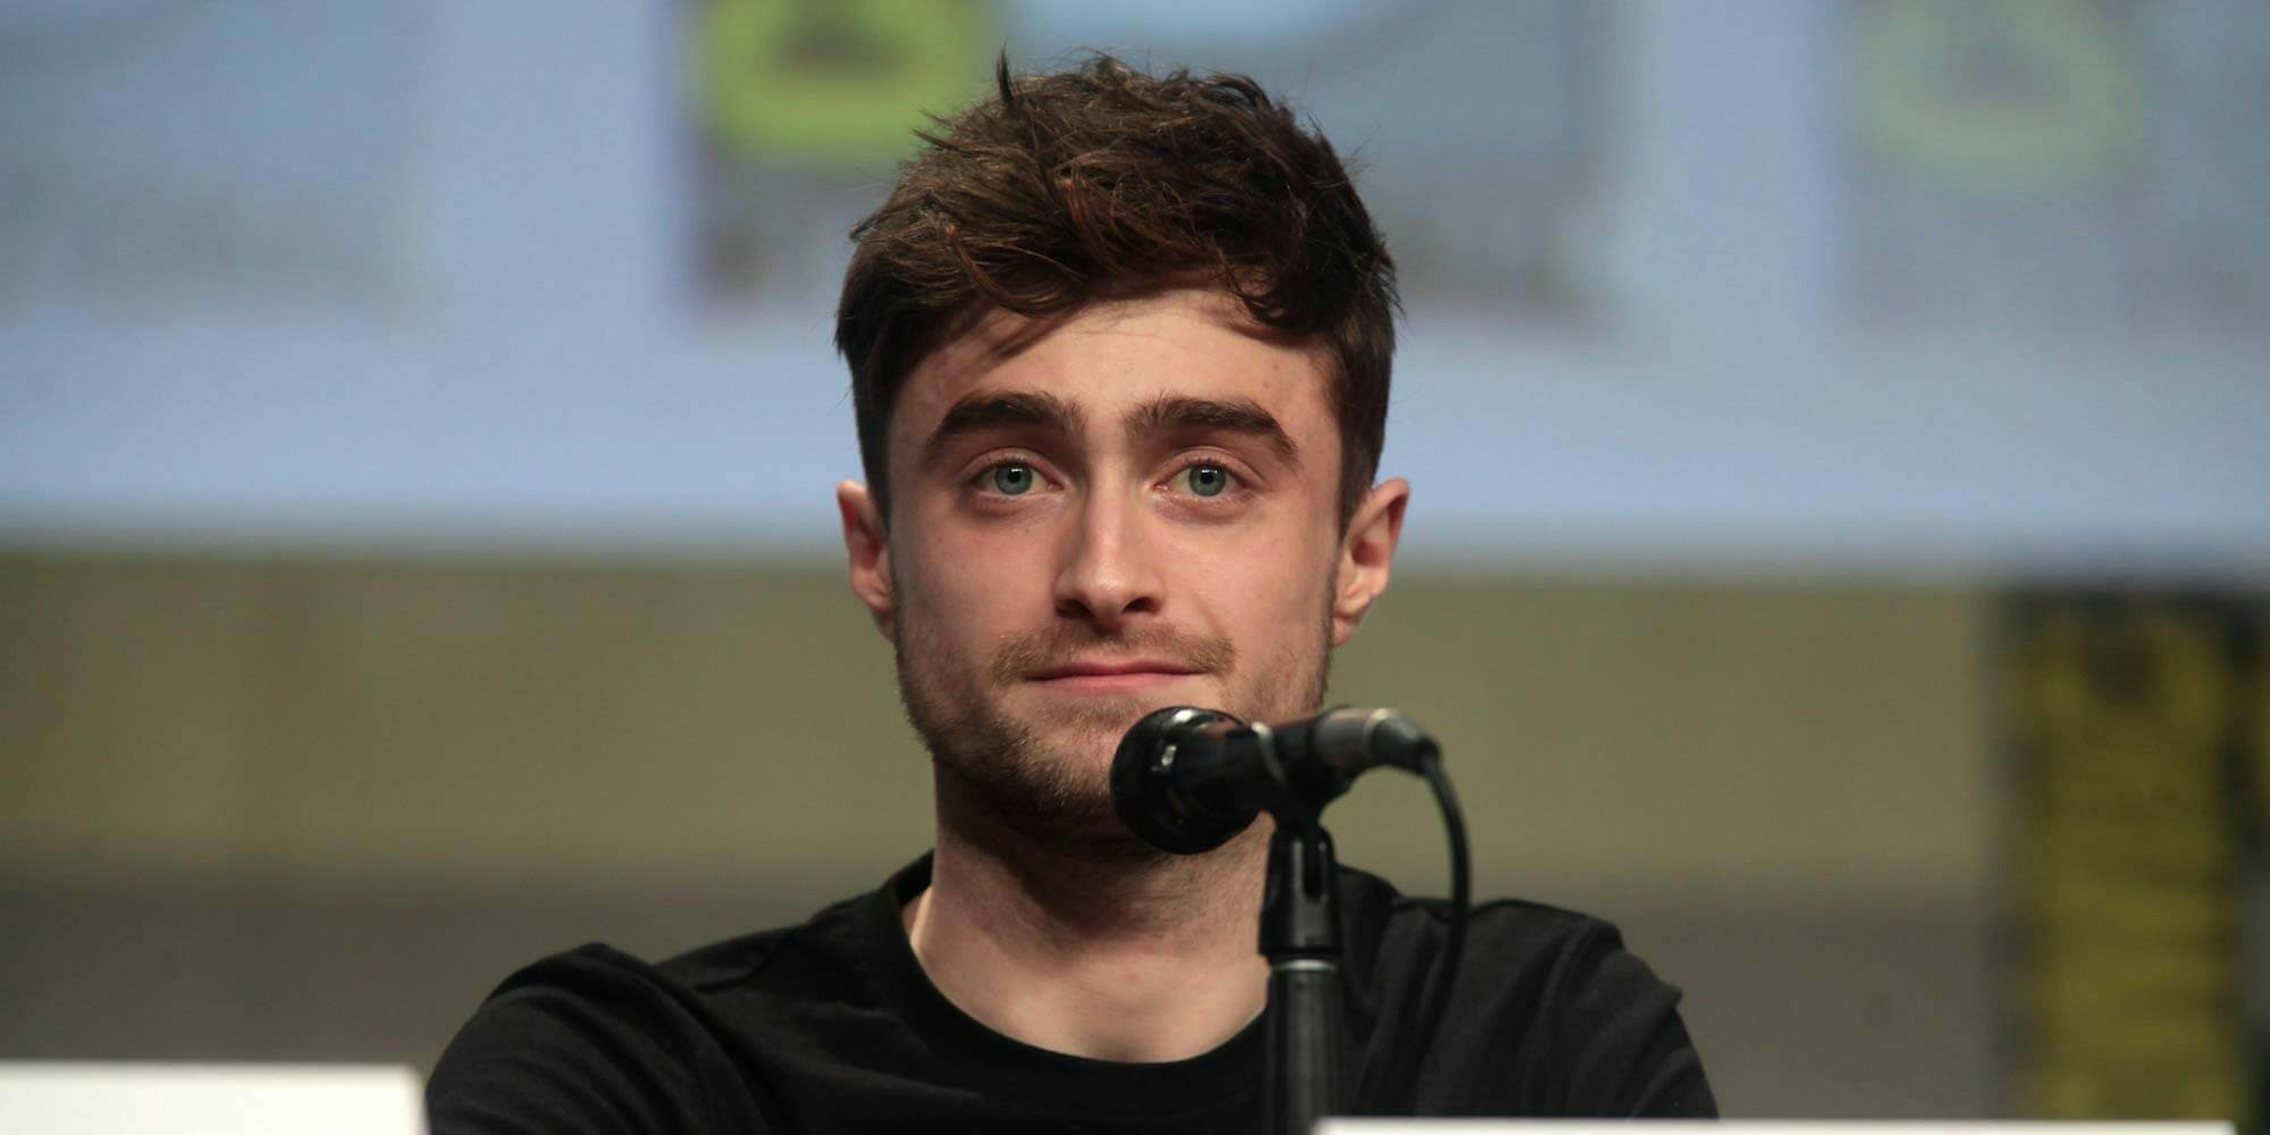 Actor Daniel Radcliffe in front of a microphone